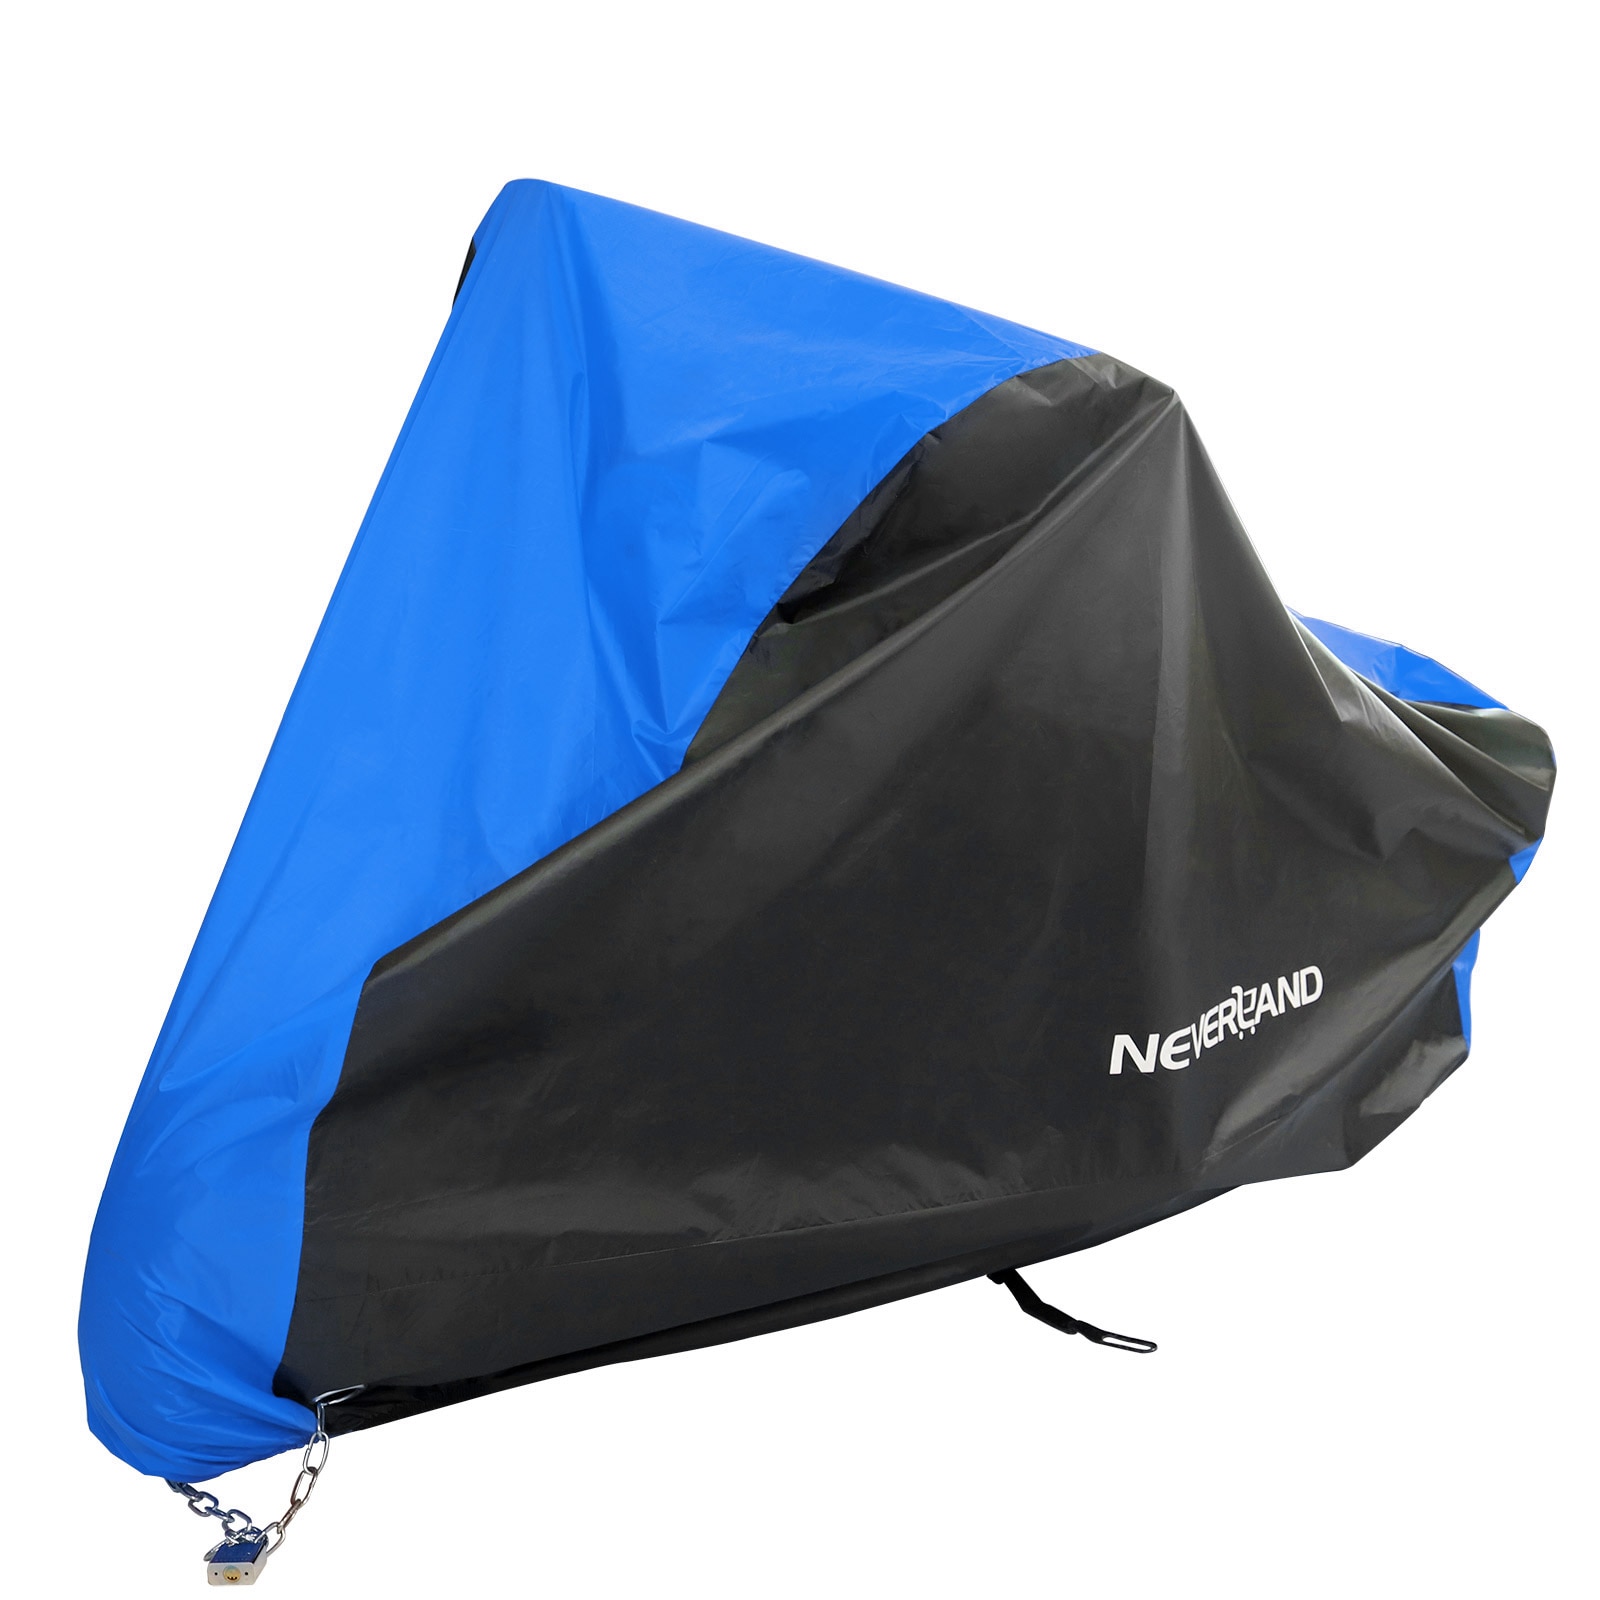 Water and Dust Proof Motorcycle Cover